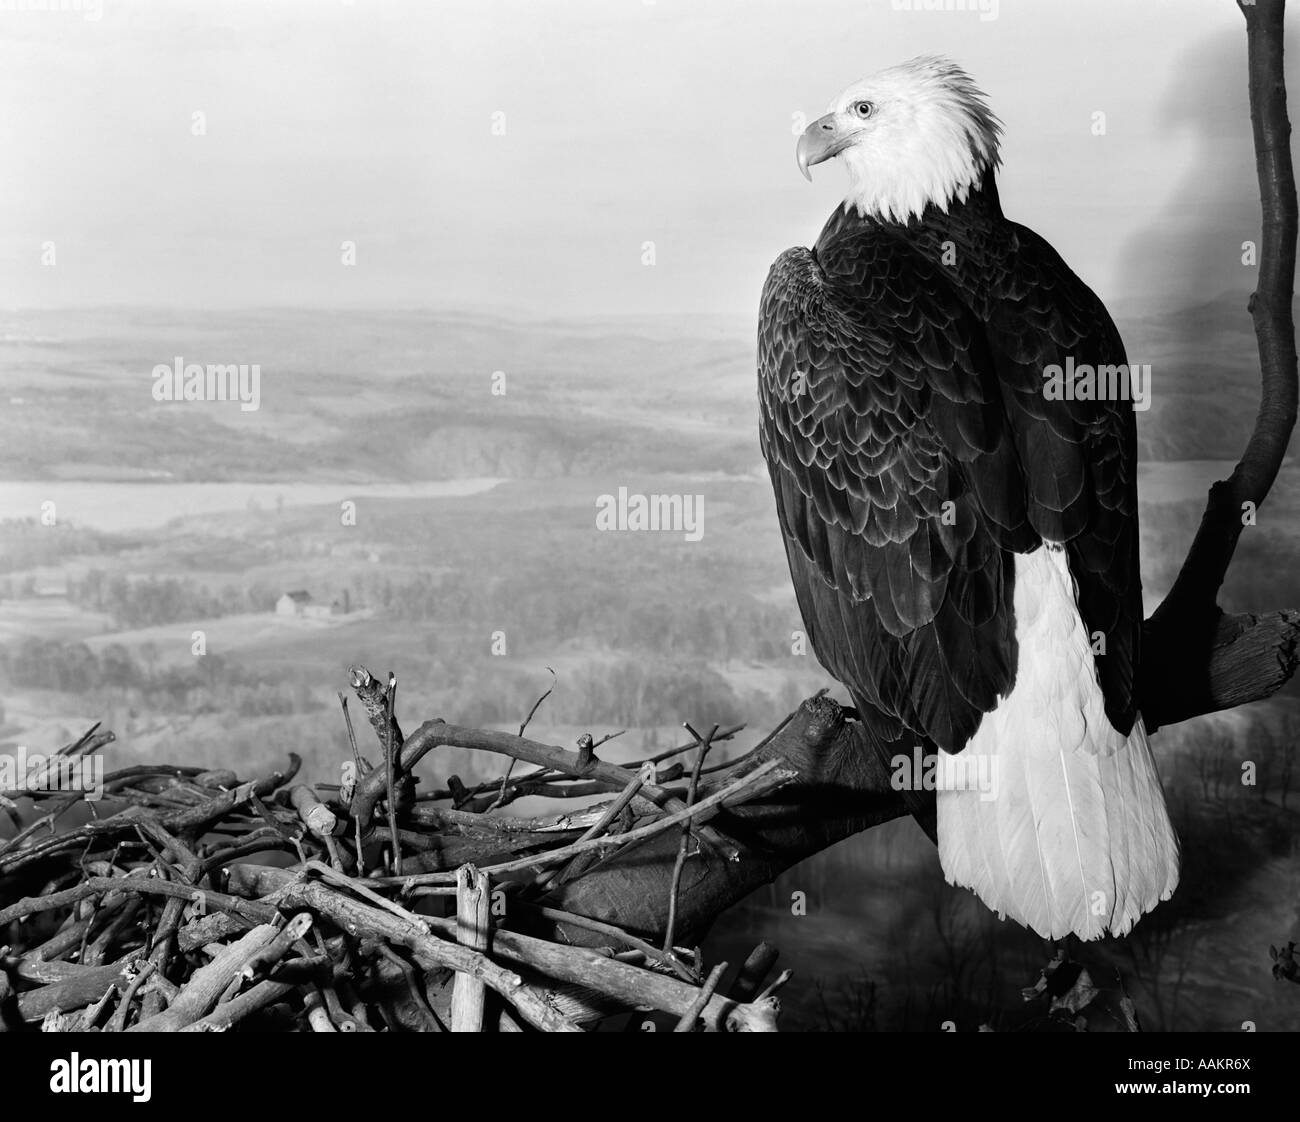 MUSEUM SETTING VIEW OF BALD EAGLE Haliaeetus leucocephalus WITH HEAD TURNED TO SIDE PERCHED ON BRANCH OVERLOOKING LANDSCAPE Stock Photo